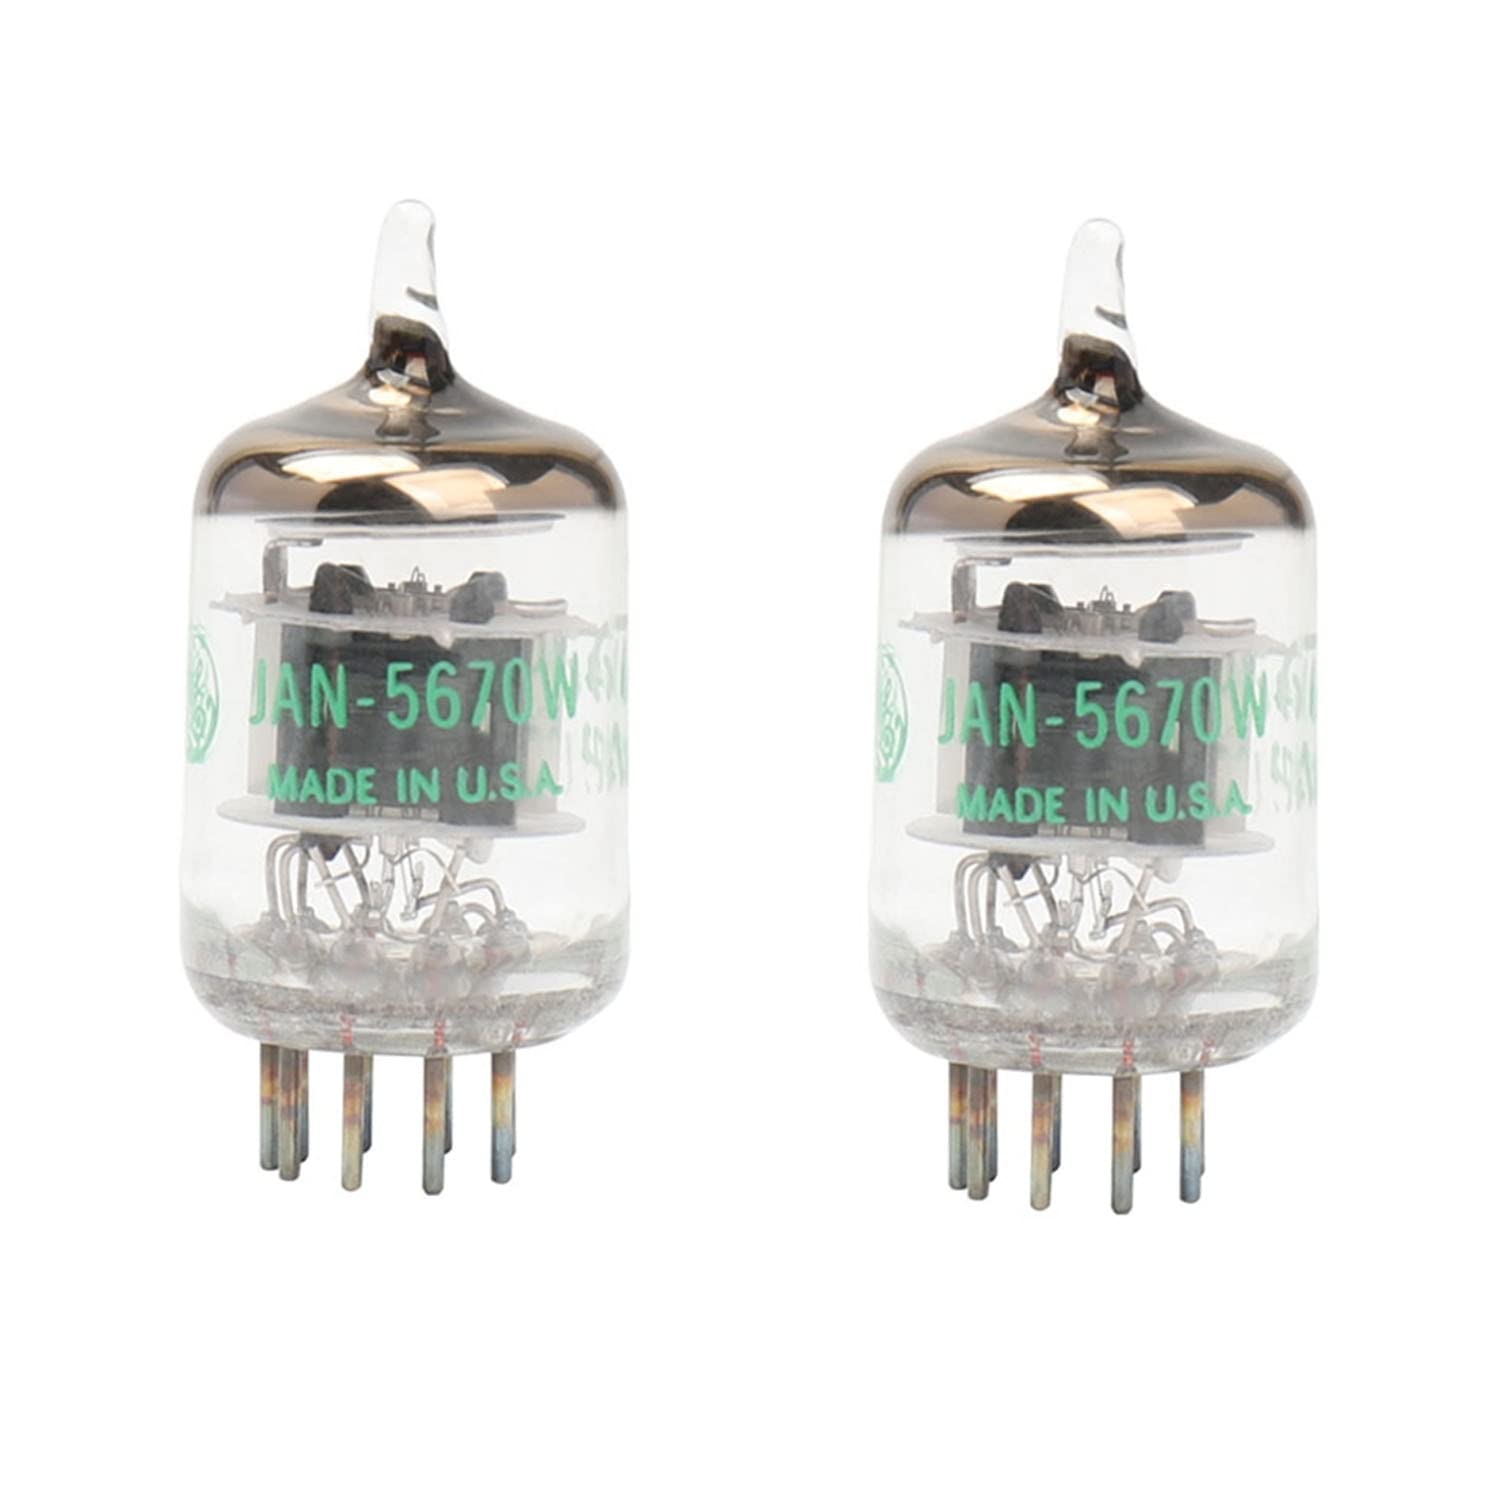 JINGERL GE 5670W. Rohr-Upgrade. 6N3 / 6H3N / 396A / 2C51/5670 Preamplier Tube (Color : 1PAIR)